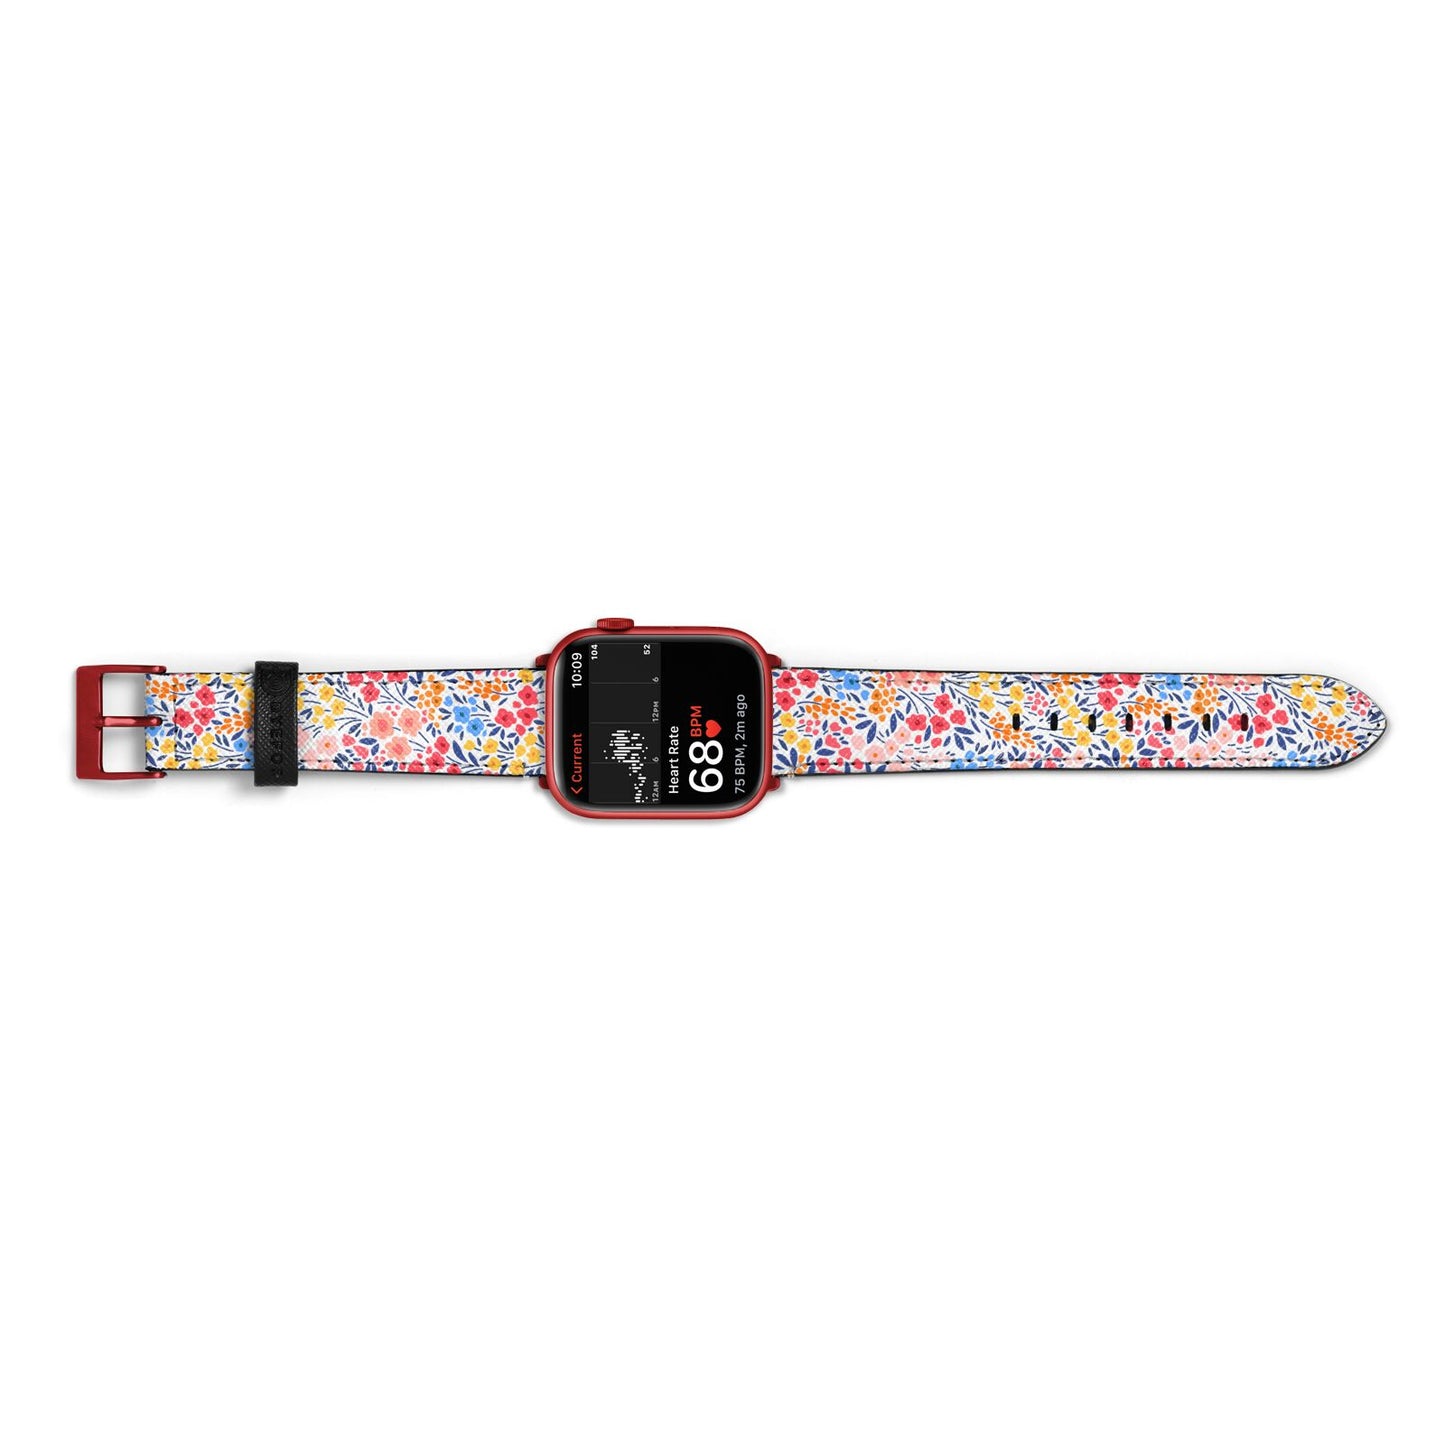 Small Flowers Apple Watch Strap Size 38mm Landscape Image Red Hardware